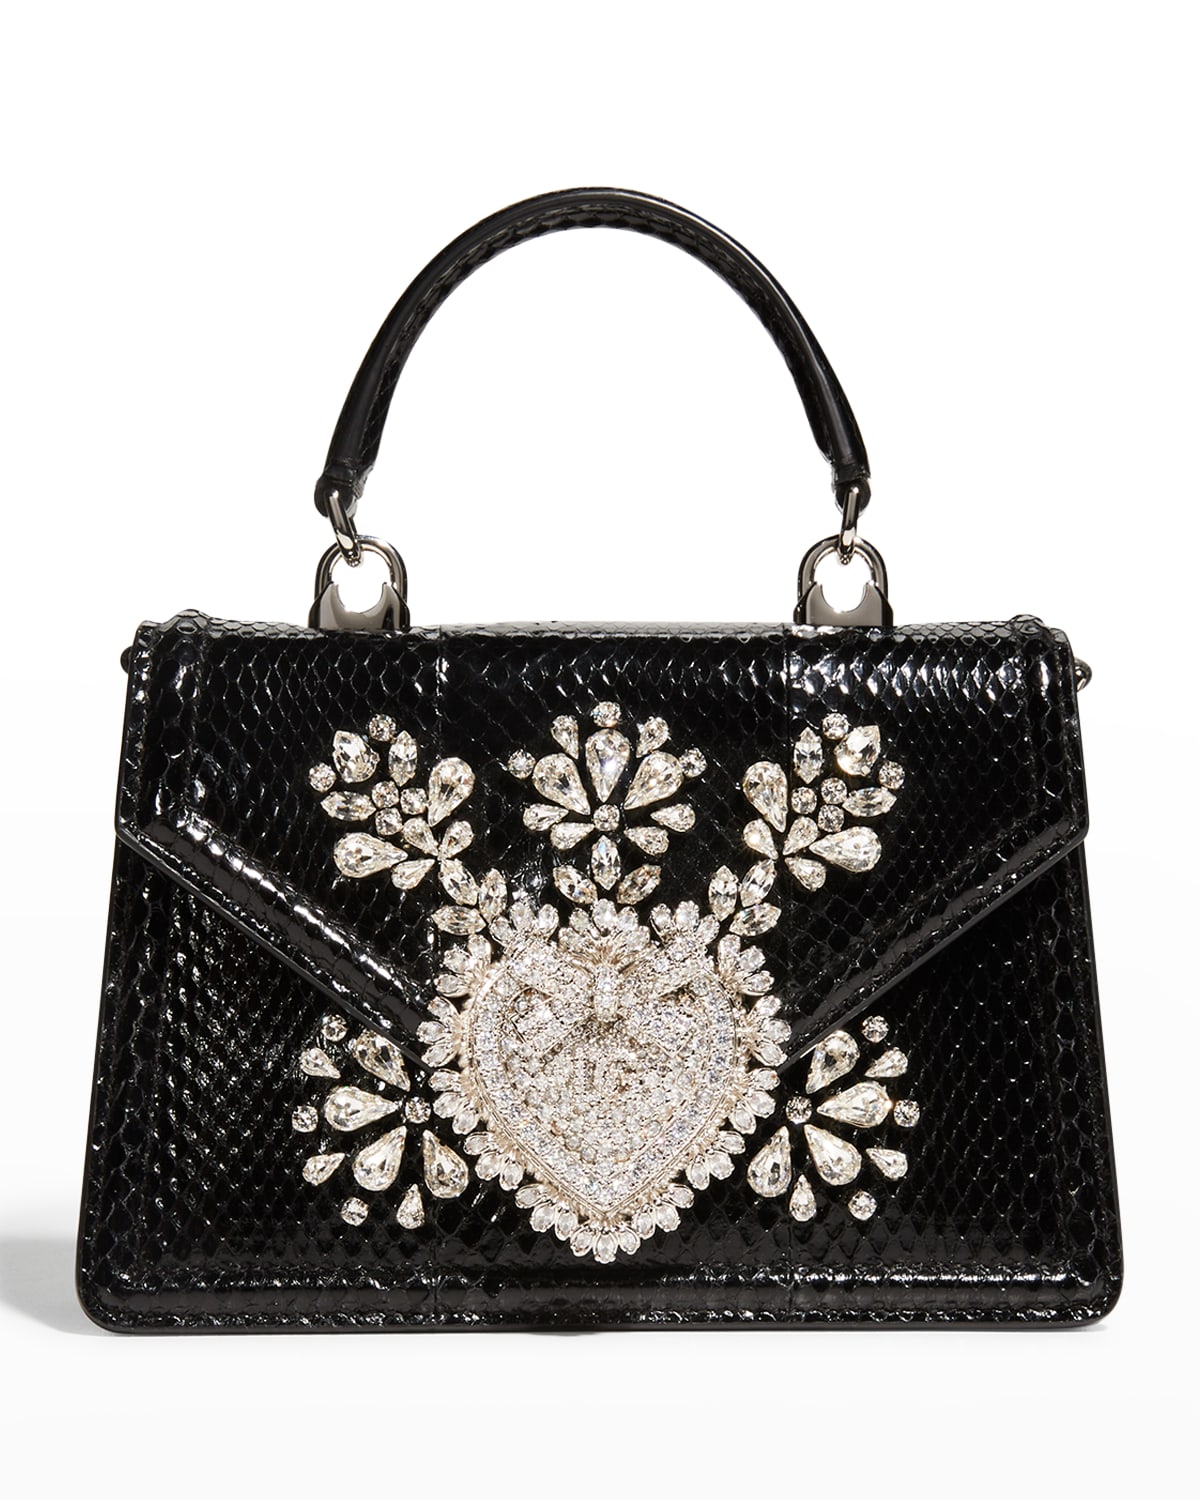 Favorite Evening Bags for the holidays 2022